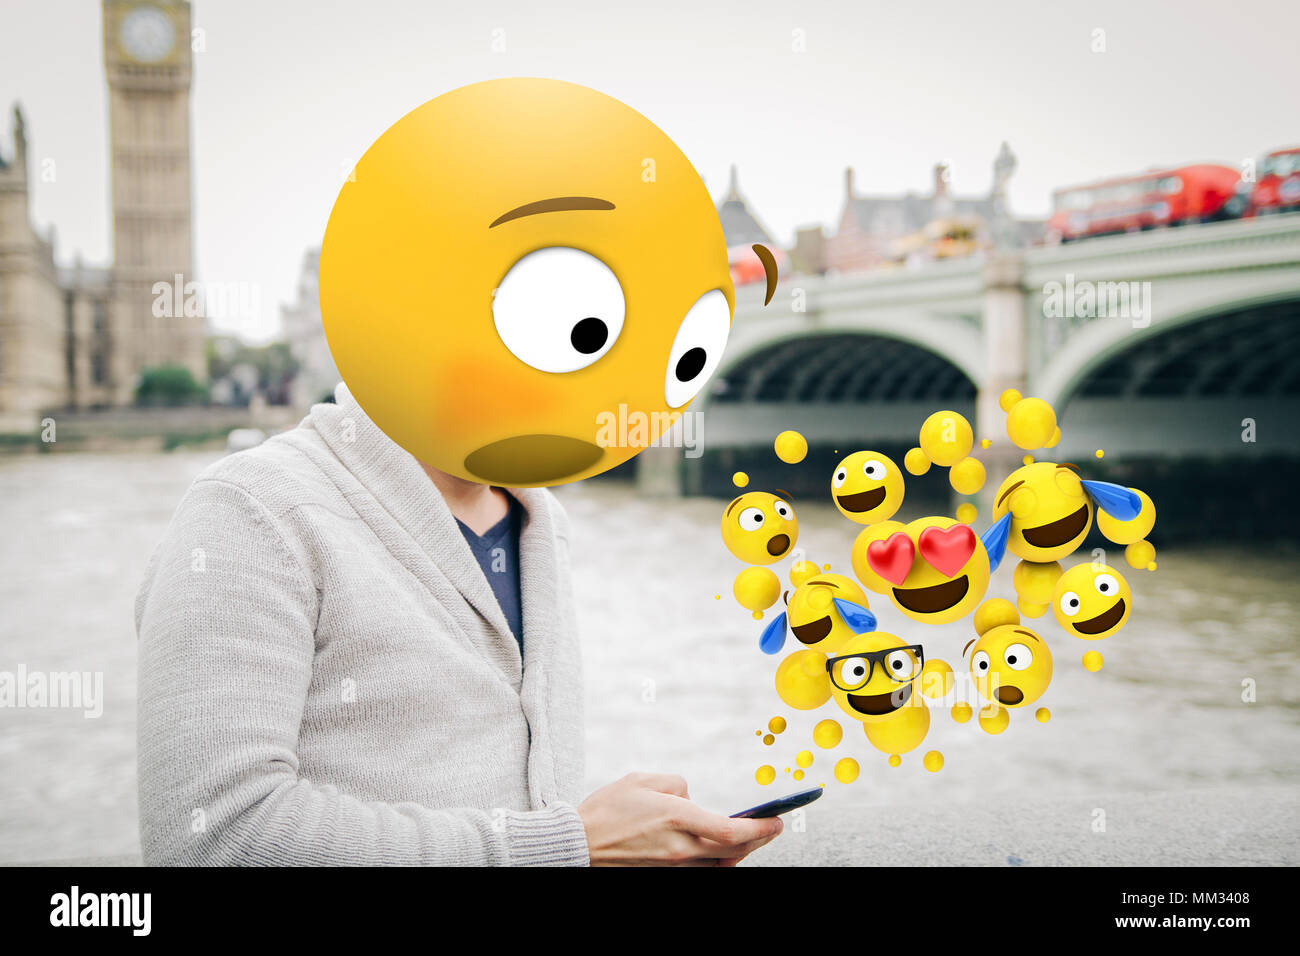 man with emoji head surprised looking at the smartphone al london city Stock Photo